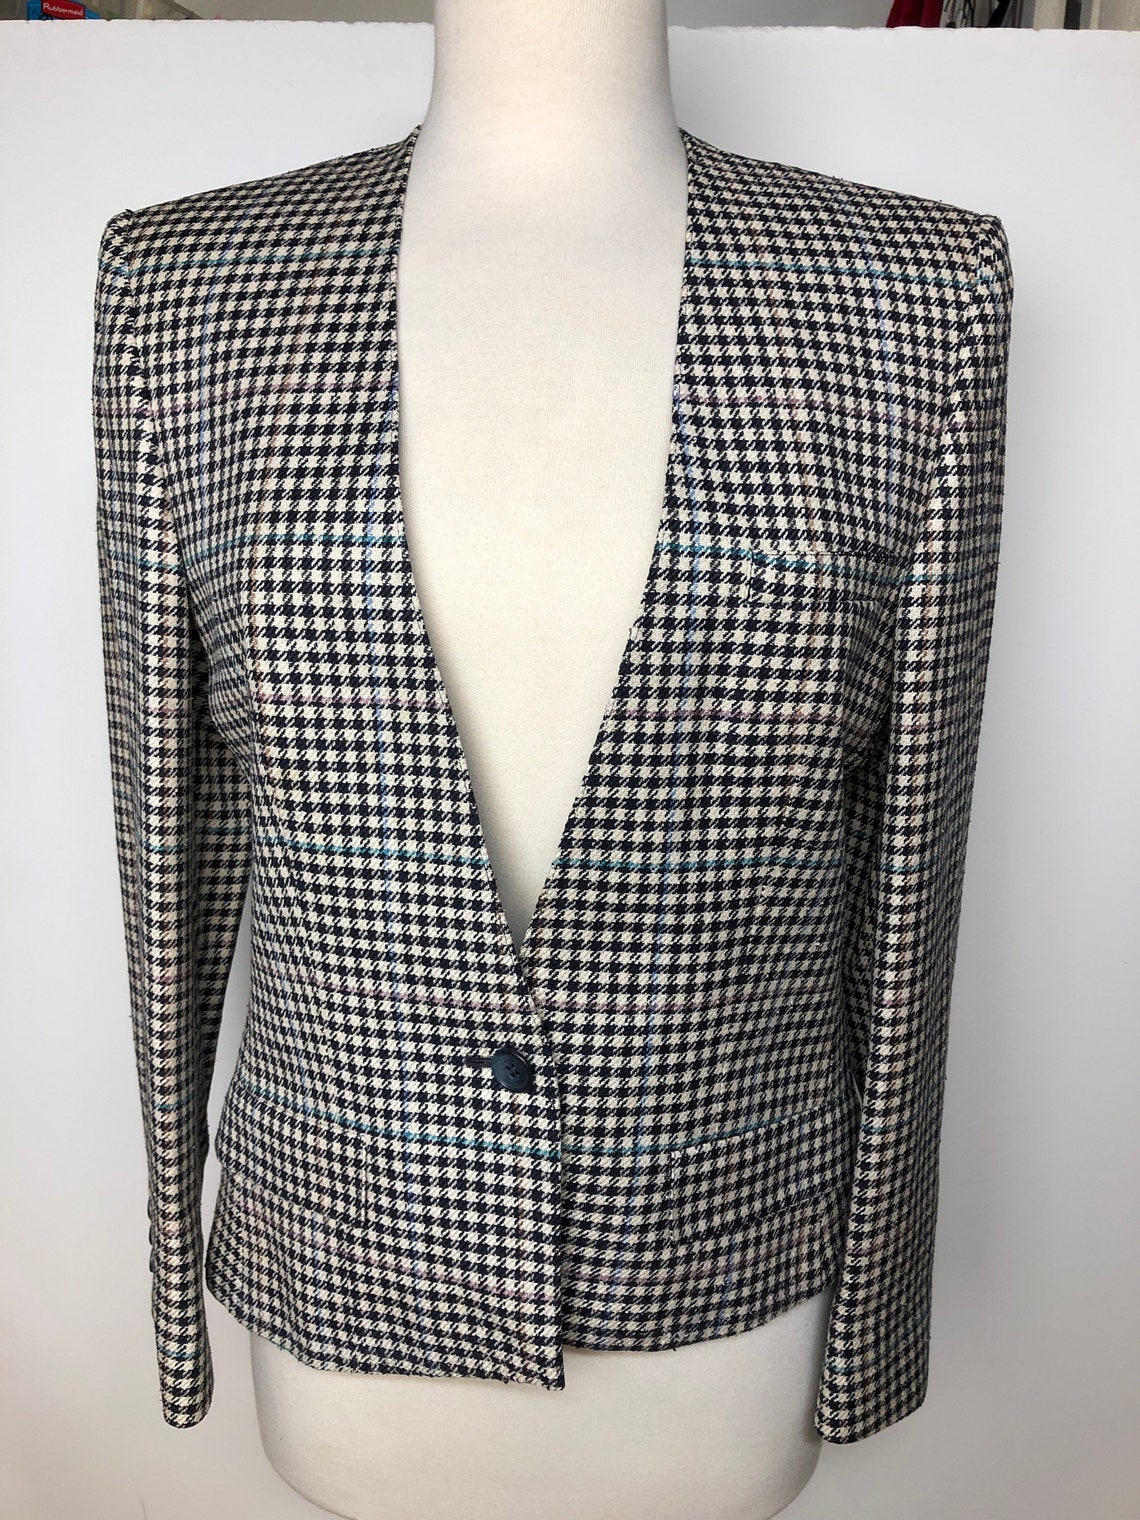 Barrie Pace Women Skirt Suit Black White Plaid Houndstooth | Etsy